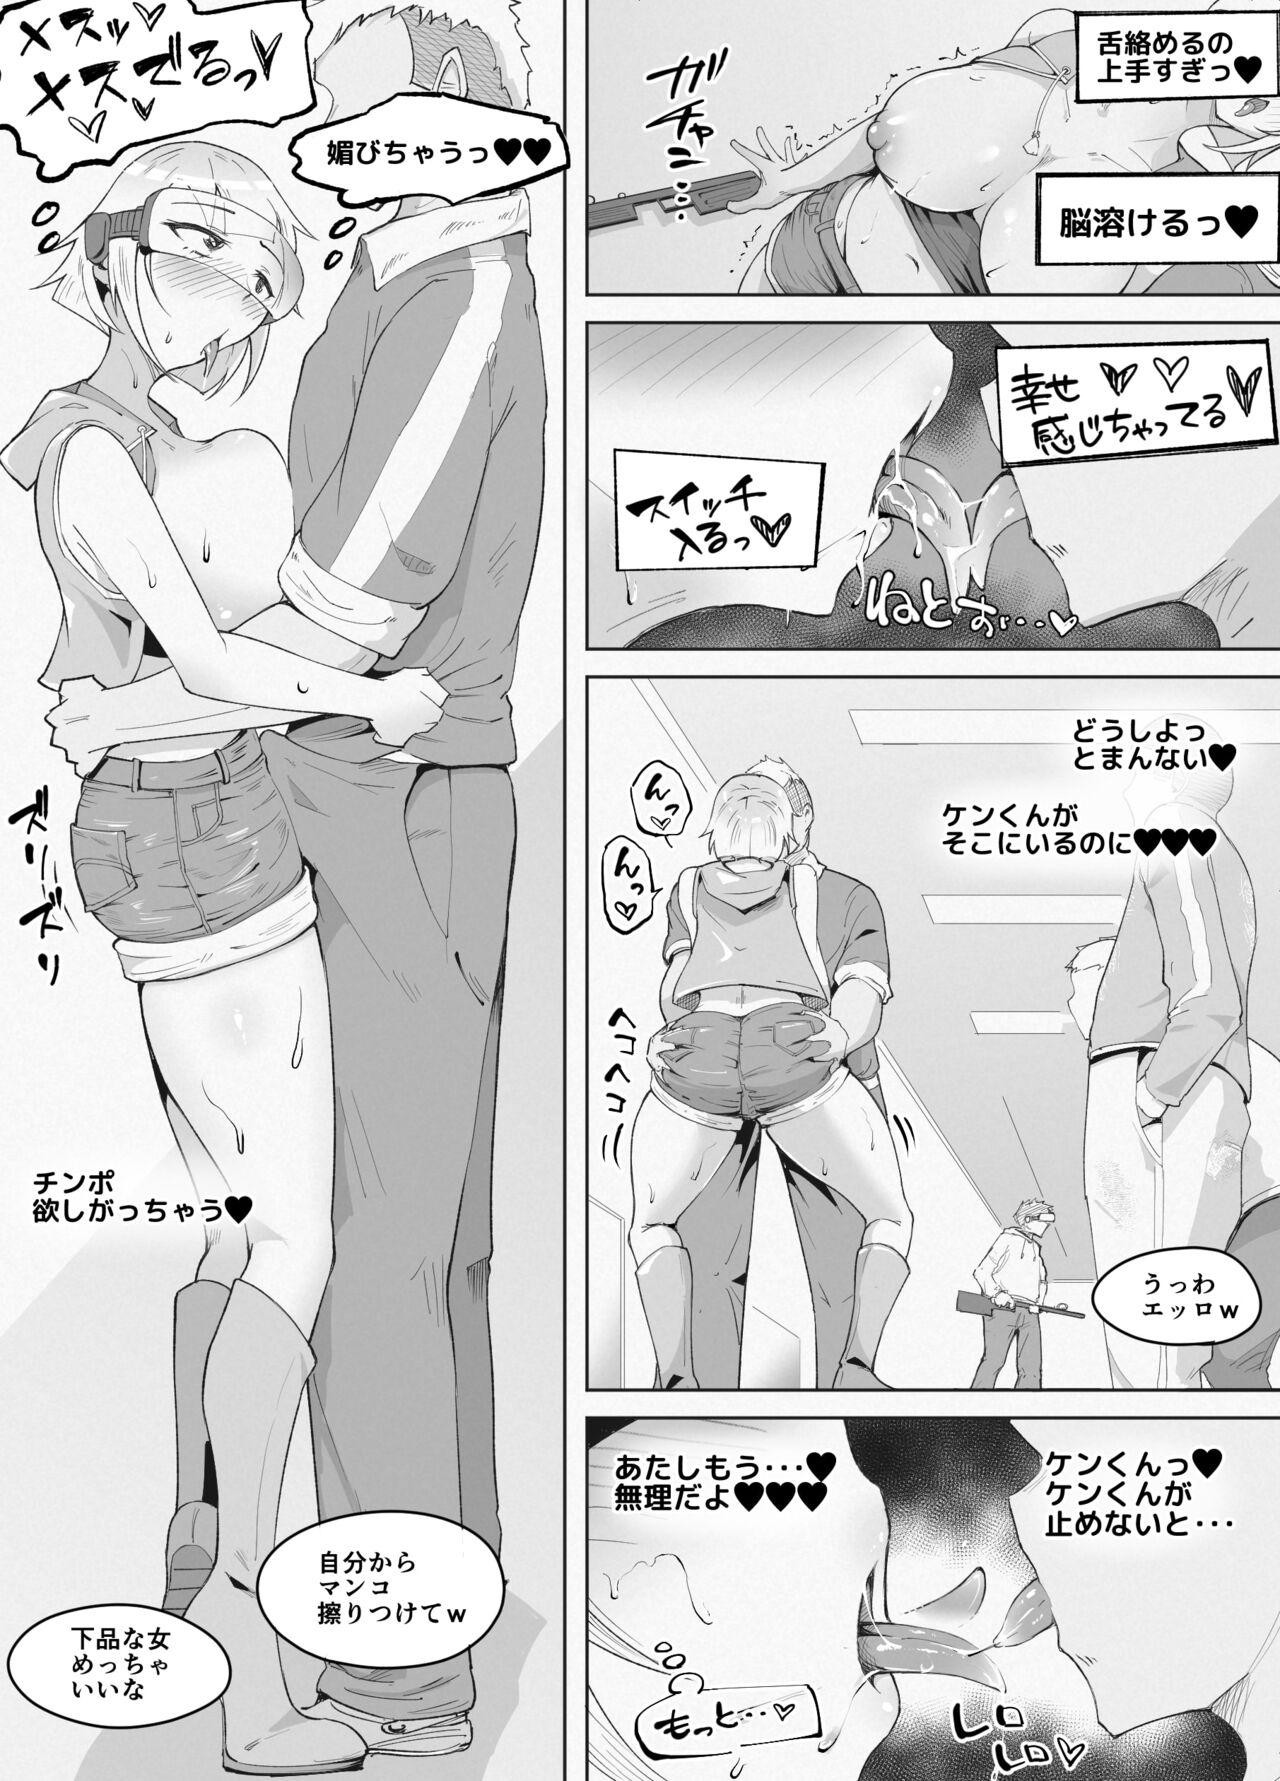 Star Girlfriend Who Immediately Falls Next To You During The VR Experience - Original Moneytalks - Page 9